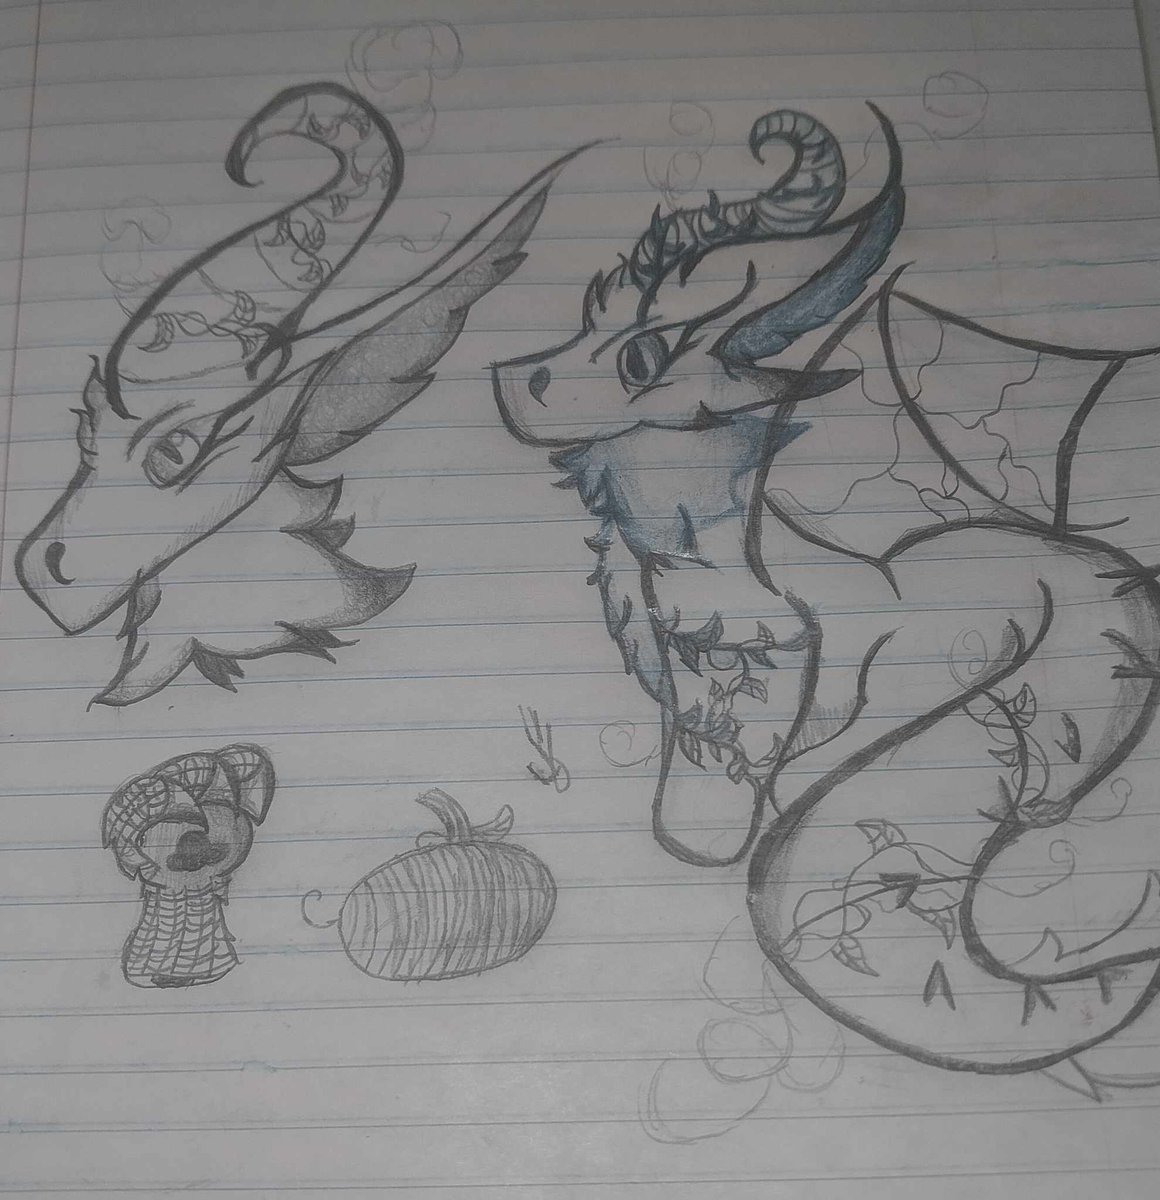 Here are some pumpkin dragon drawings. The dragon is based on pumpkin. The art is done by me :3
...............
 #dragon #dragons #dragonart #dragondrawing #art #drawing #furry #furryart #furryartwork #furryartist #furryfandom #cute #owo #uwu #furrydrawing #rawer #furrycommunity